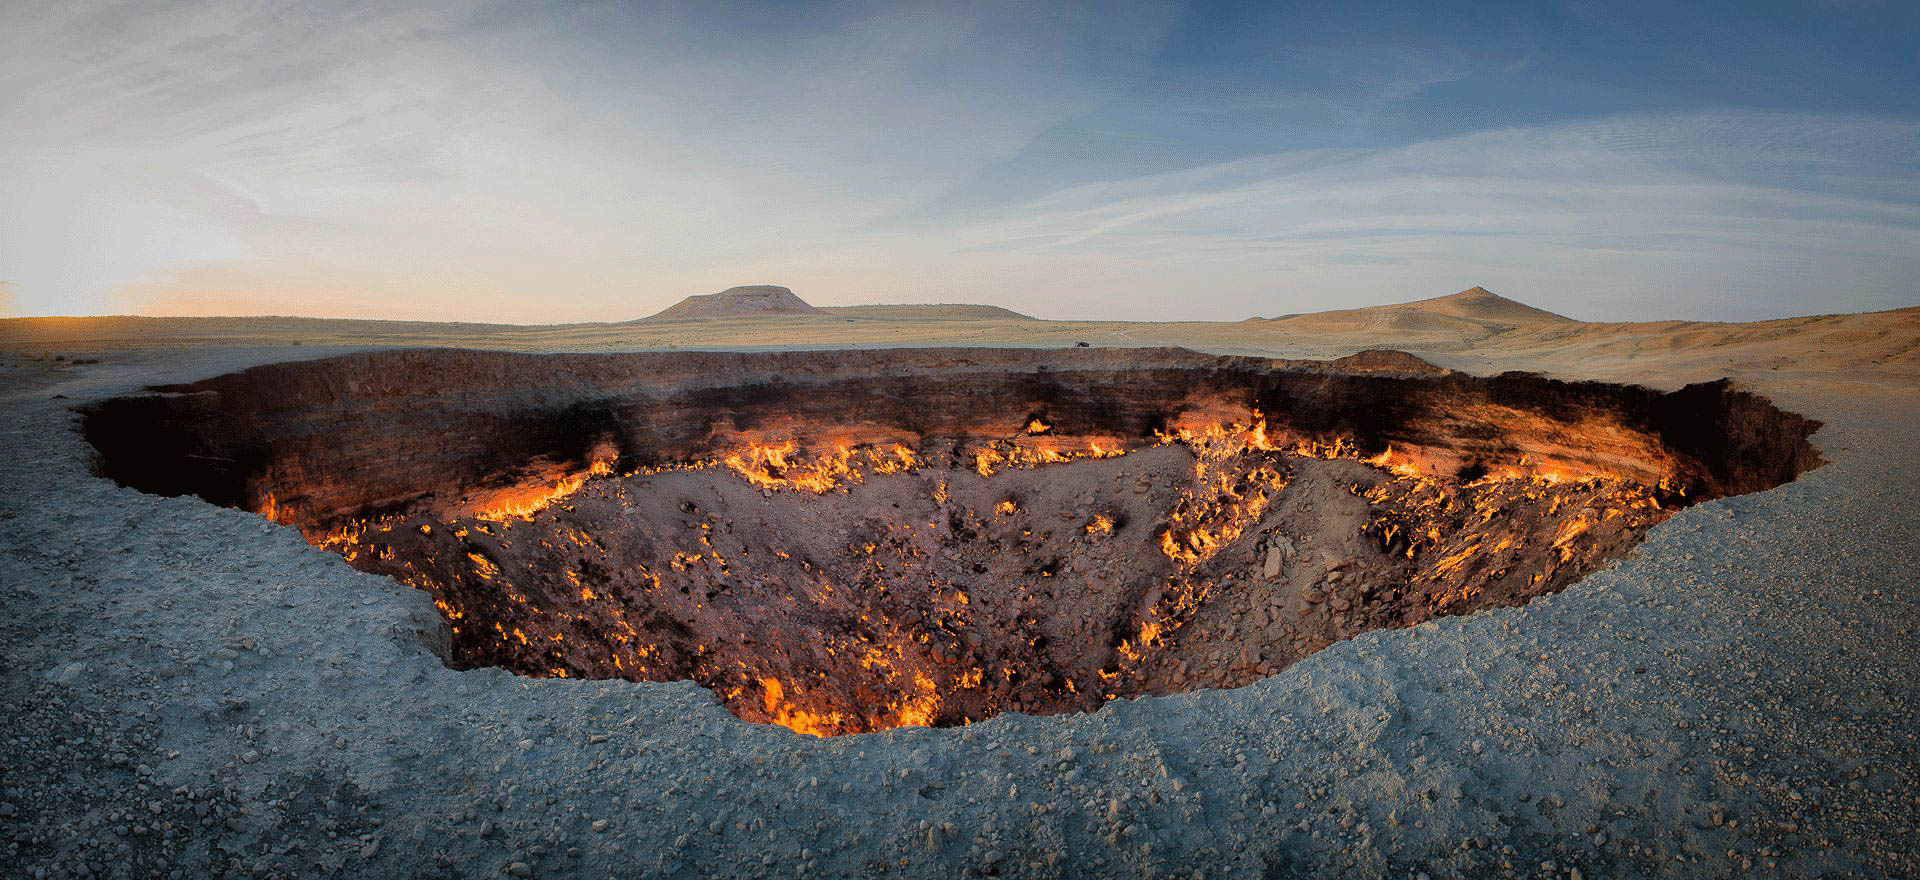 Turkmenistan Holidays and Tours - Darwaza flaming gas crater